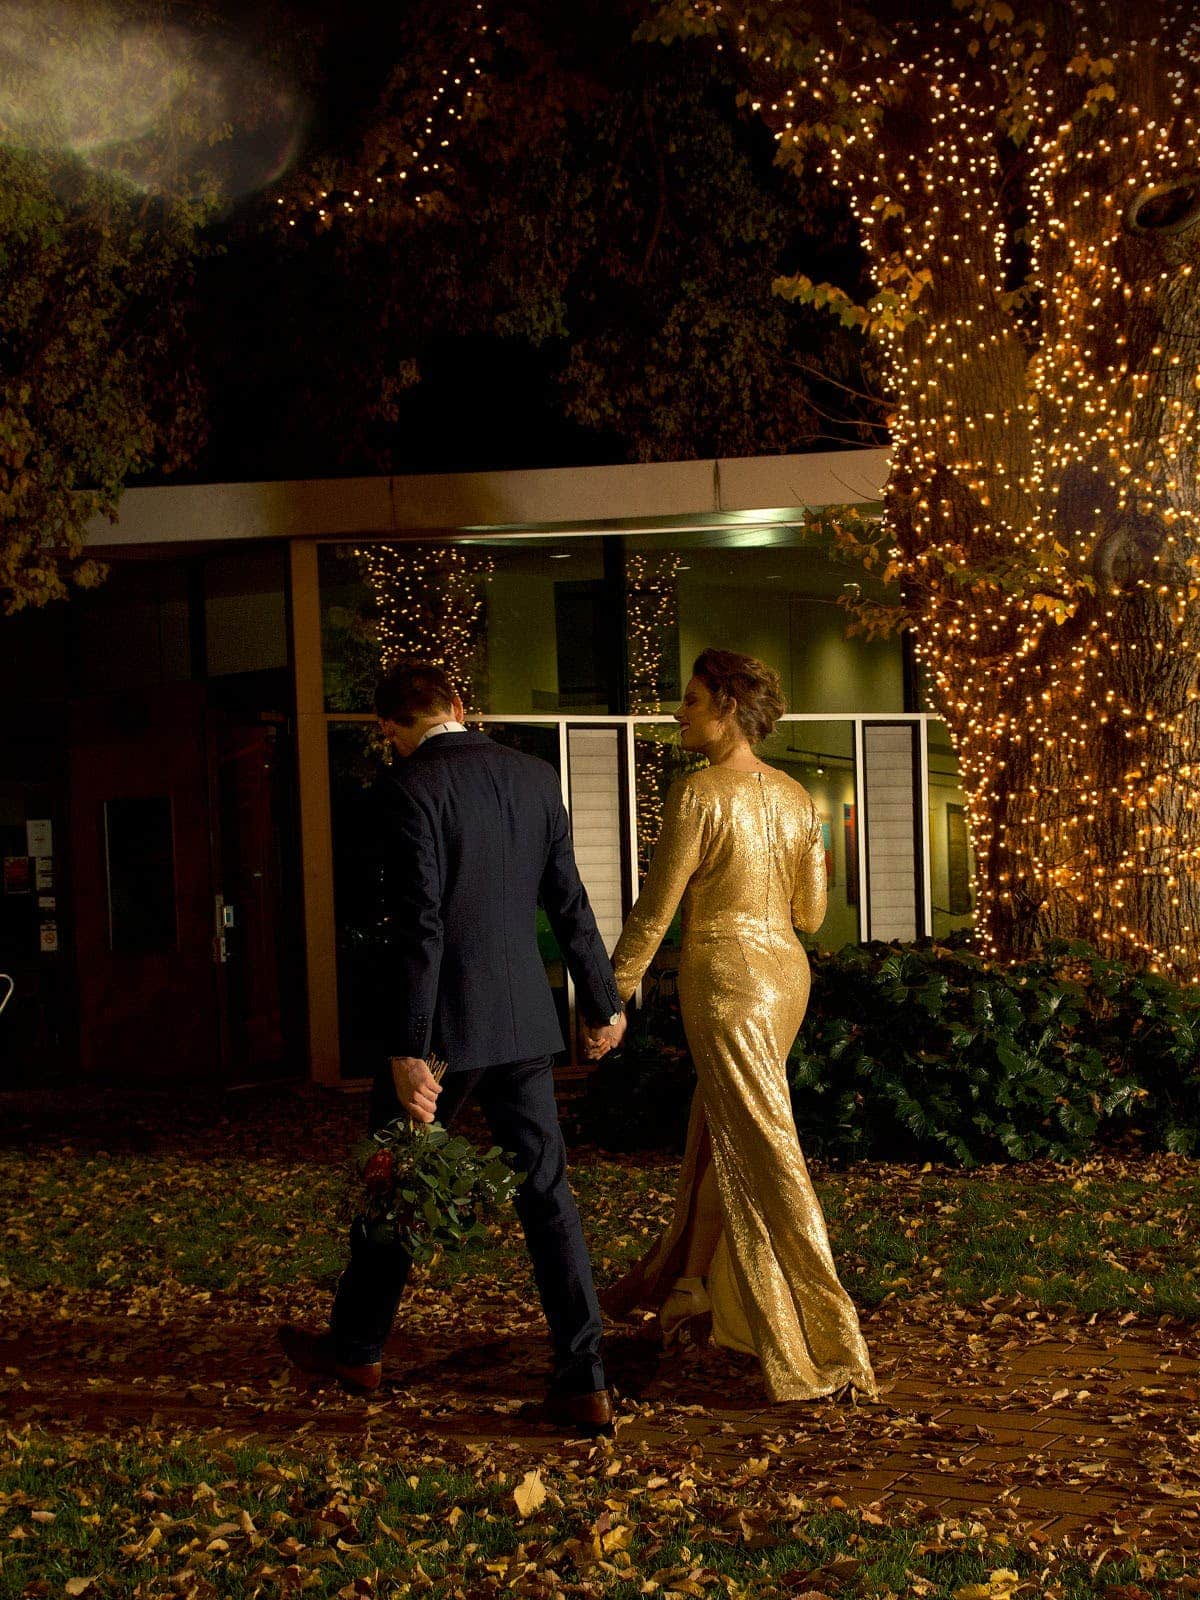 Couple dressed in after 5 attire walking towards entrance, fairy lights in tree,